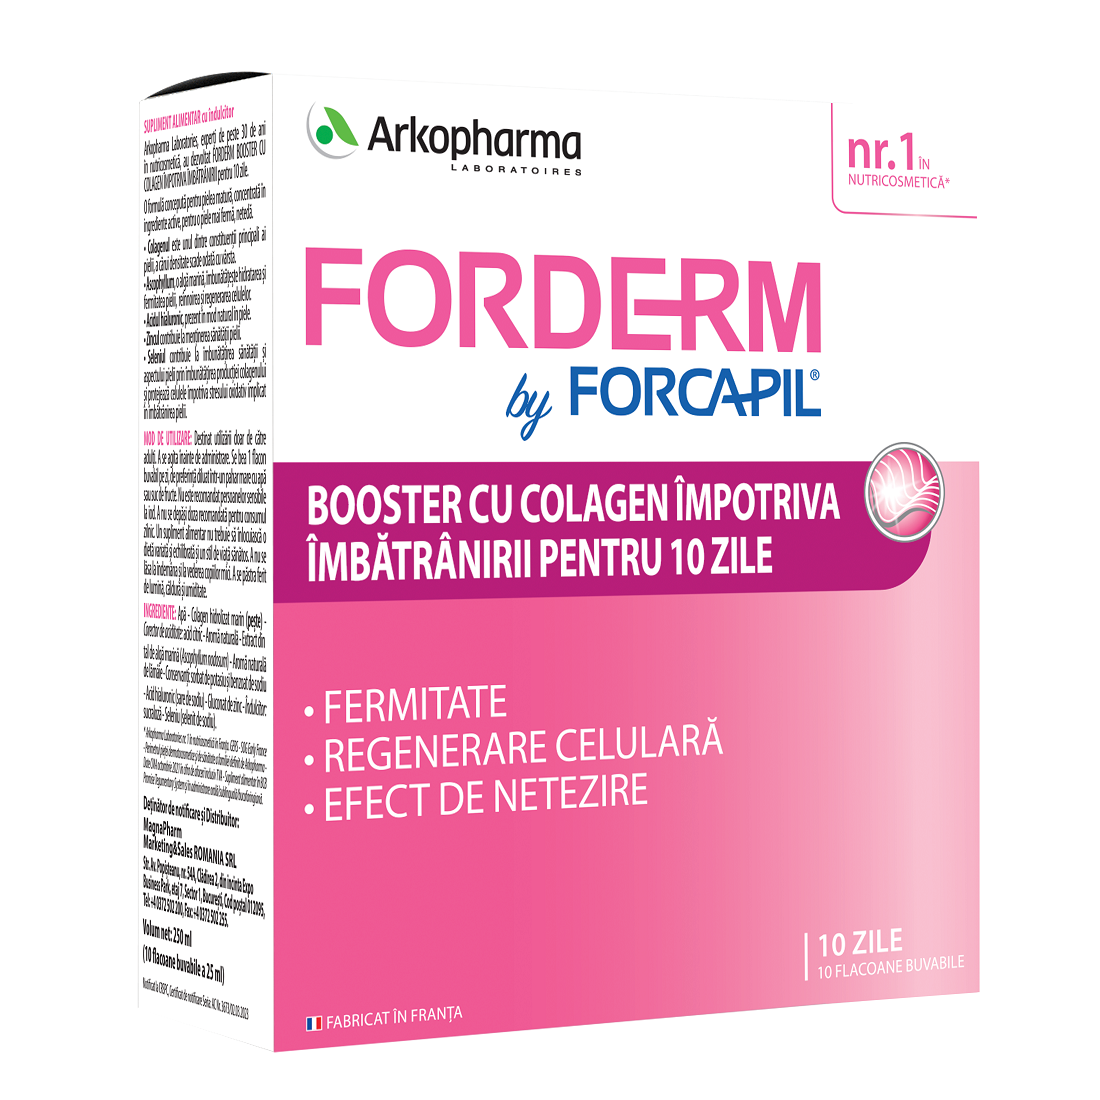 Forderm by Forcapil booster cu colagen, 10 fiole, Arkopharma